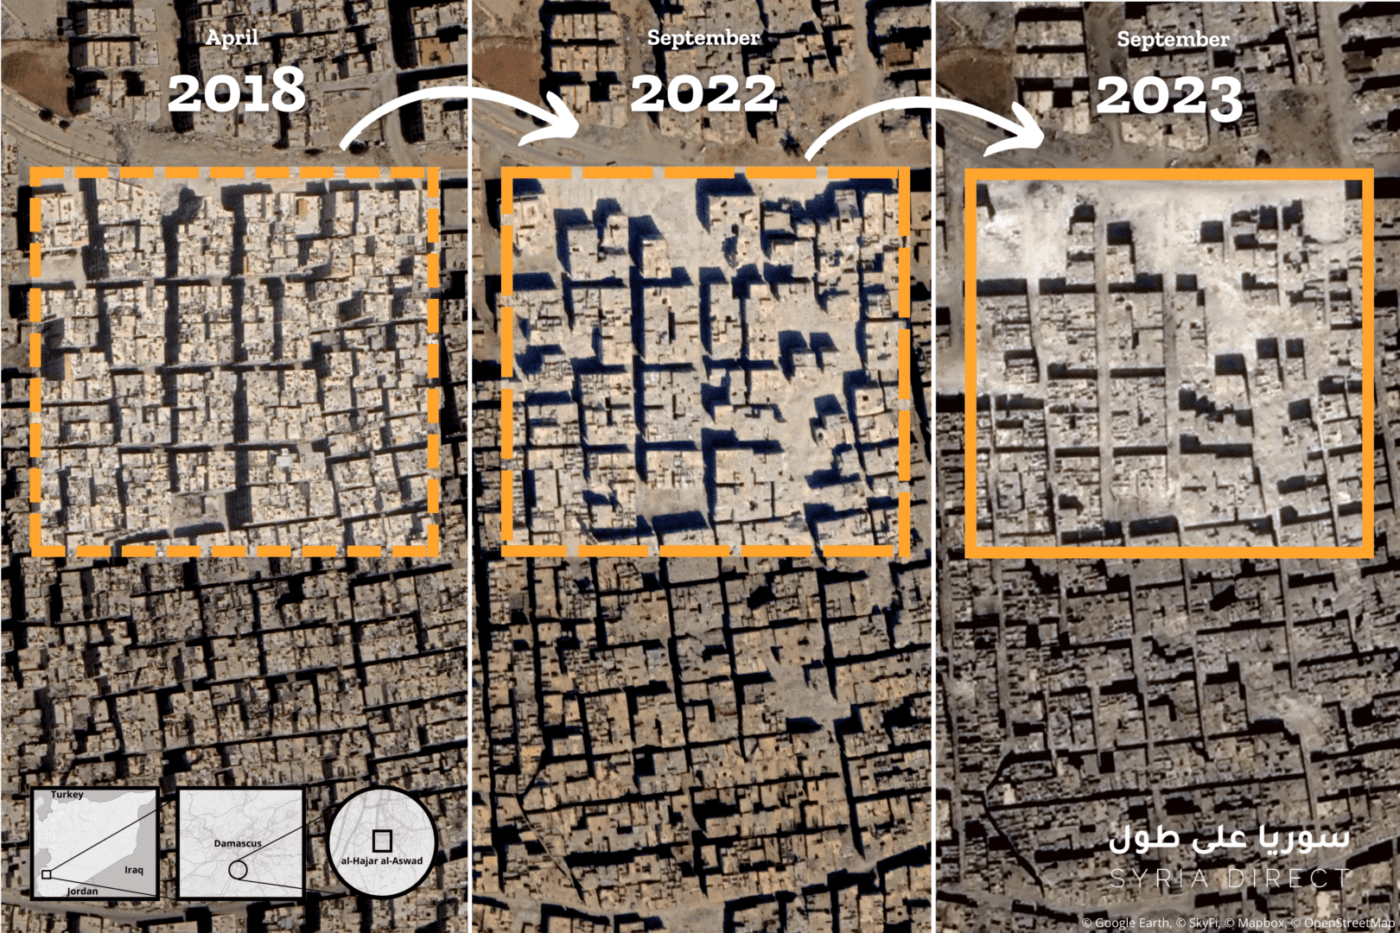 Satellite images show increasing damage to buildings in al-Hajar al-Aswad, a city south of Damascus, in the years since regime forces regained control in May 2018 (Google Earth/SkyFi/Syria Direct)